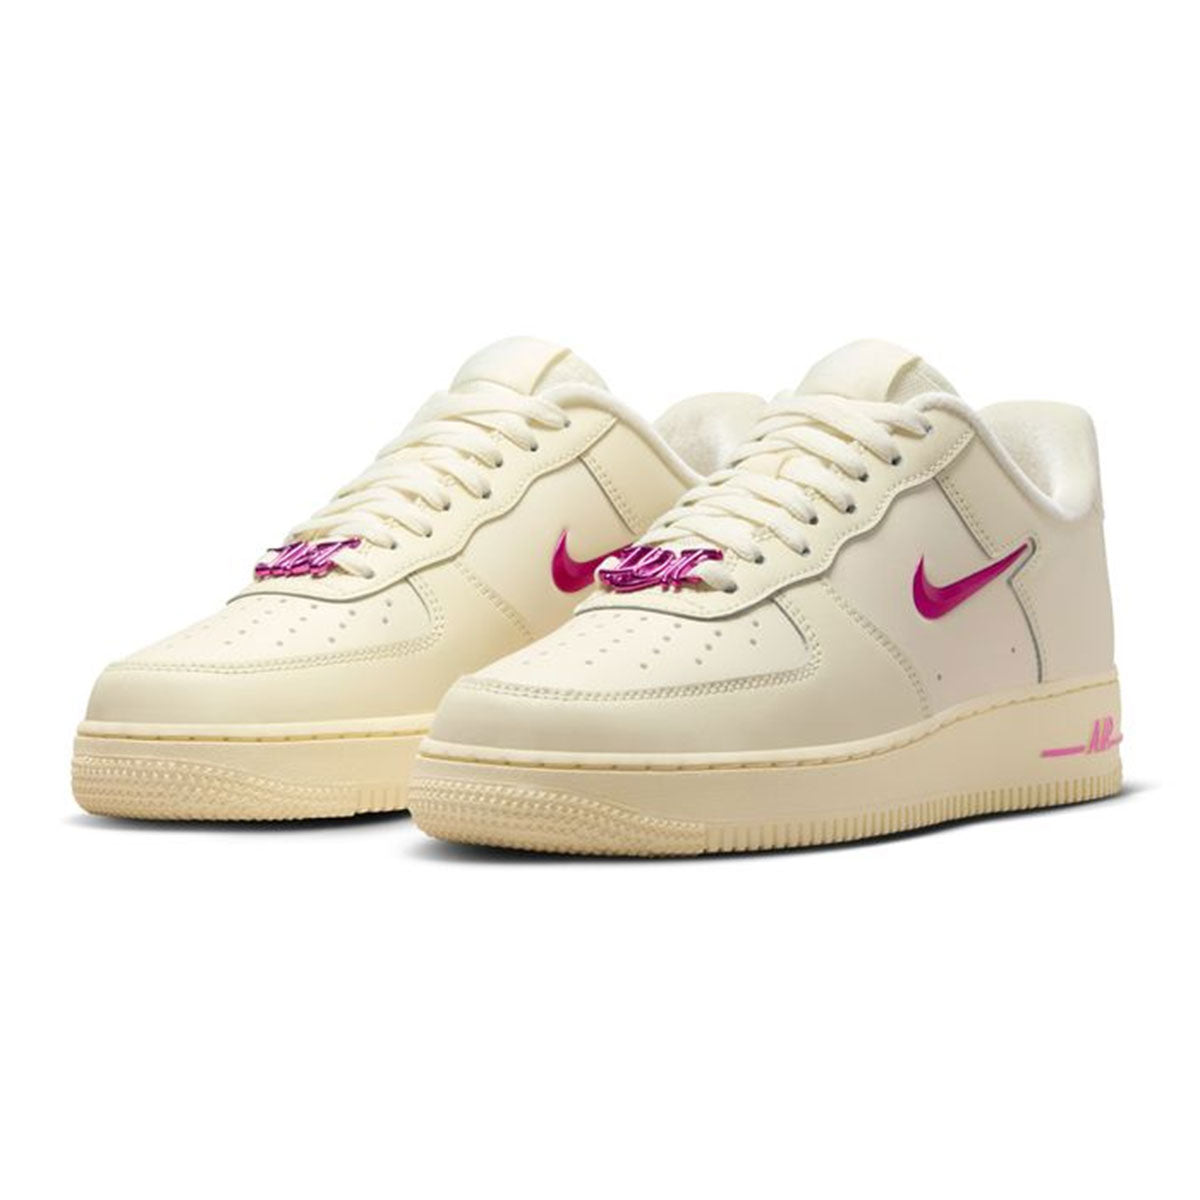 NIKE WMNS AIR FORCE 1 '07 SE Just Do It 耐吉女款 Air Force 1 '07 SE Just Do It [FB8251-101]